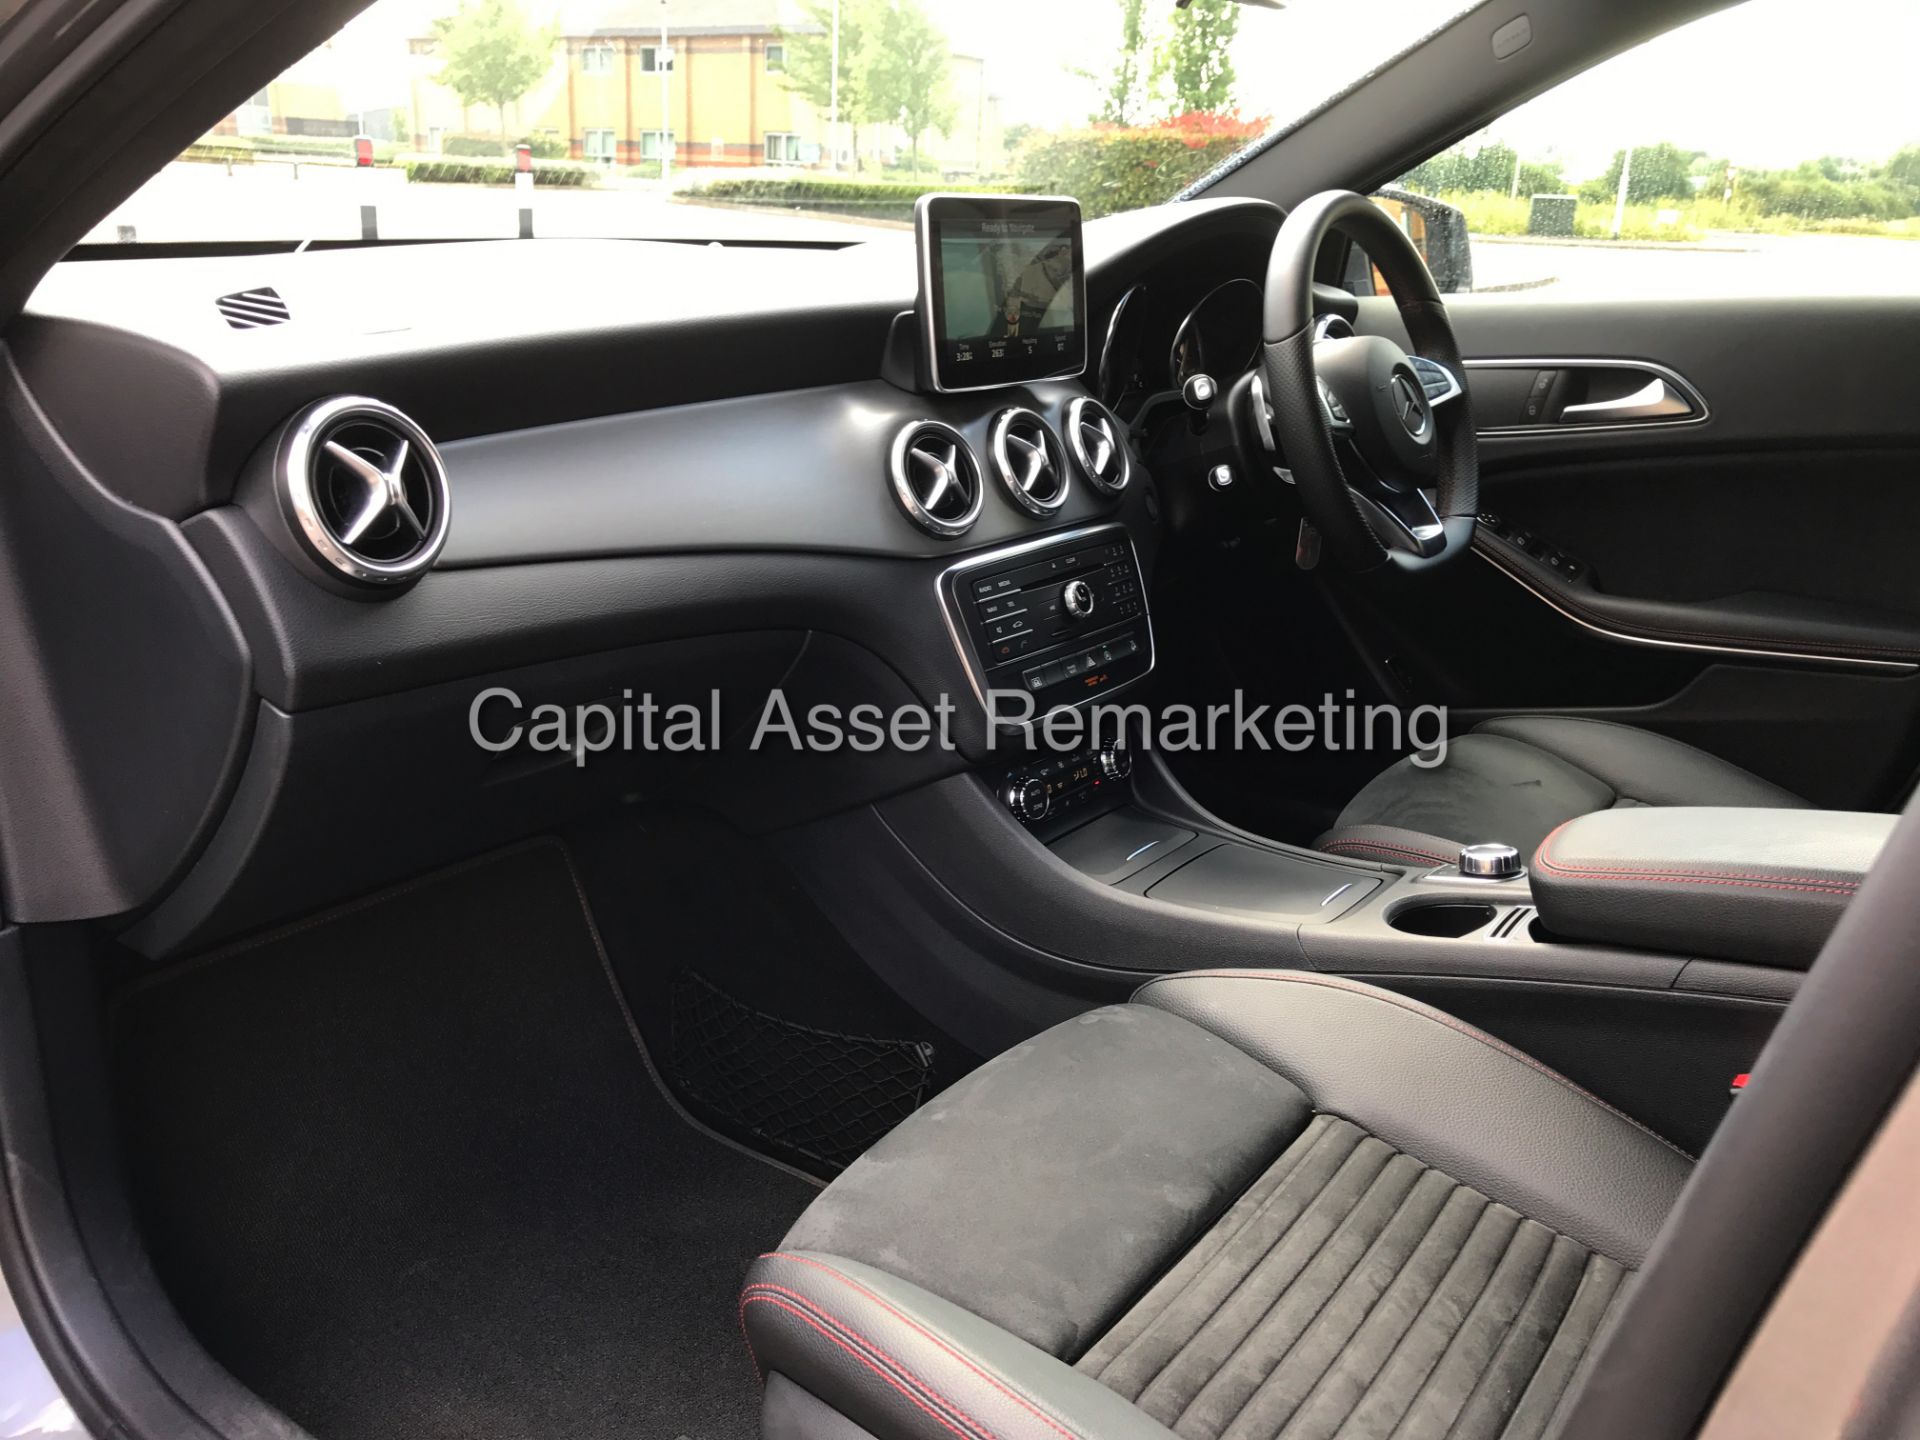 (On Sale) MERCEDES - BENZ GLA 220d "AMG LINE" 4 MATIC - 7G TRONIC AUTO - (2016 MODEL) 1 OWNER - Image 16 of 25